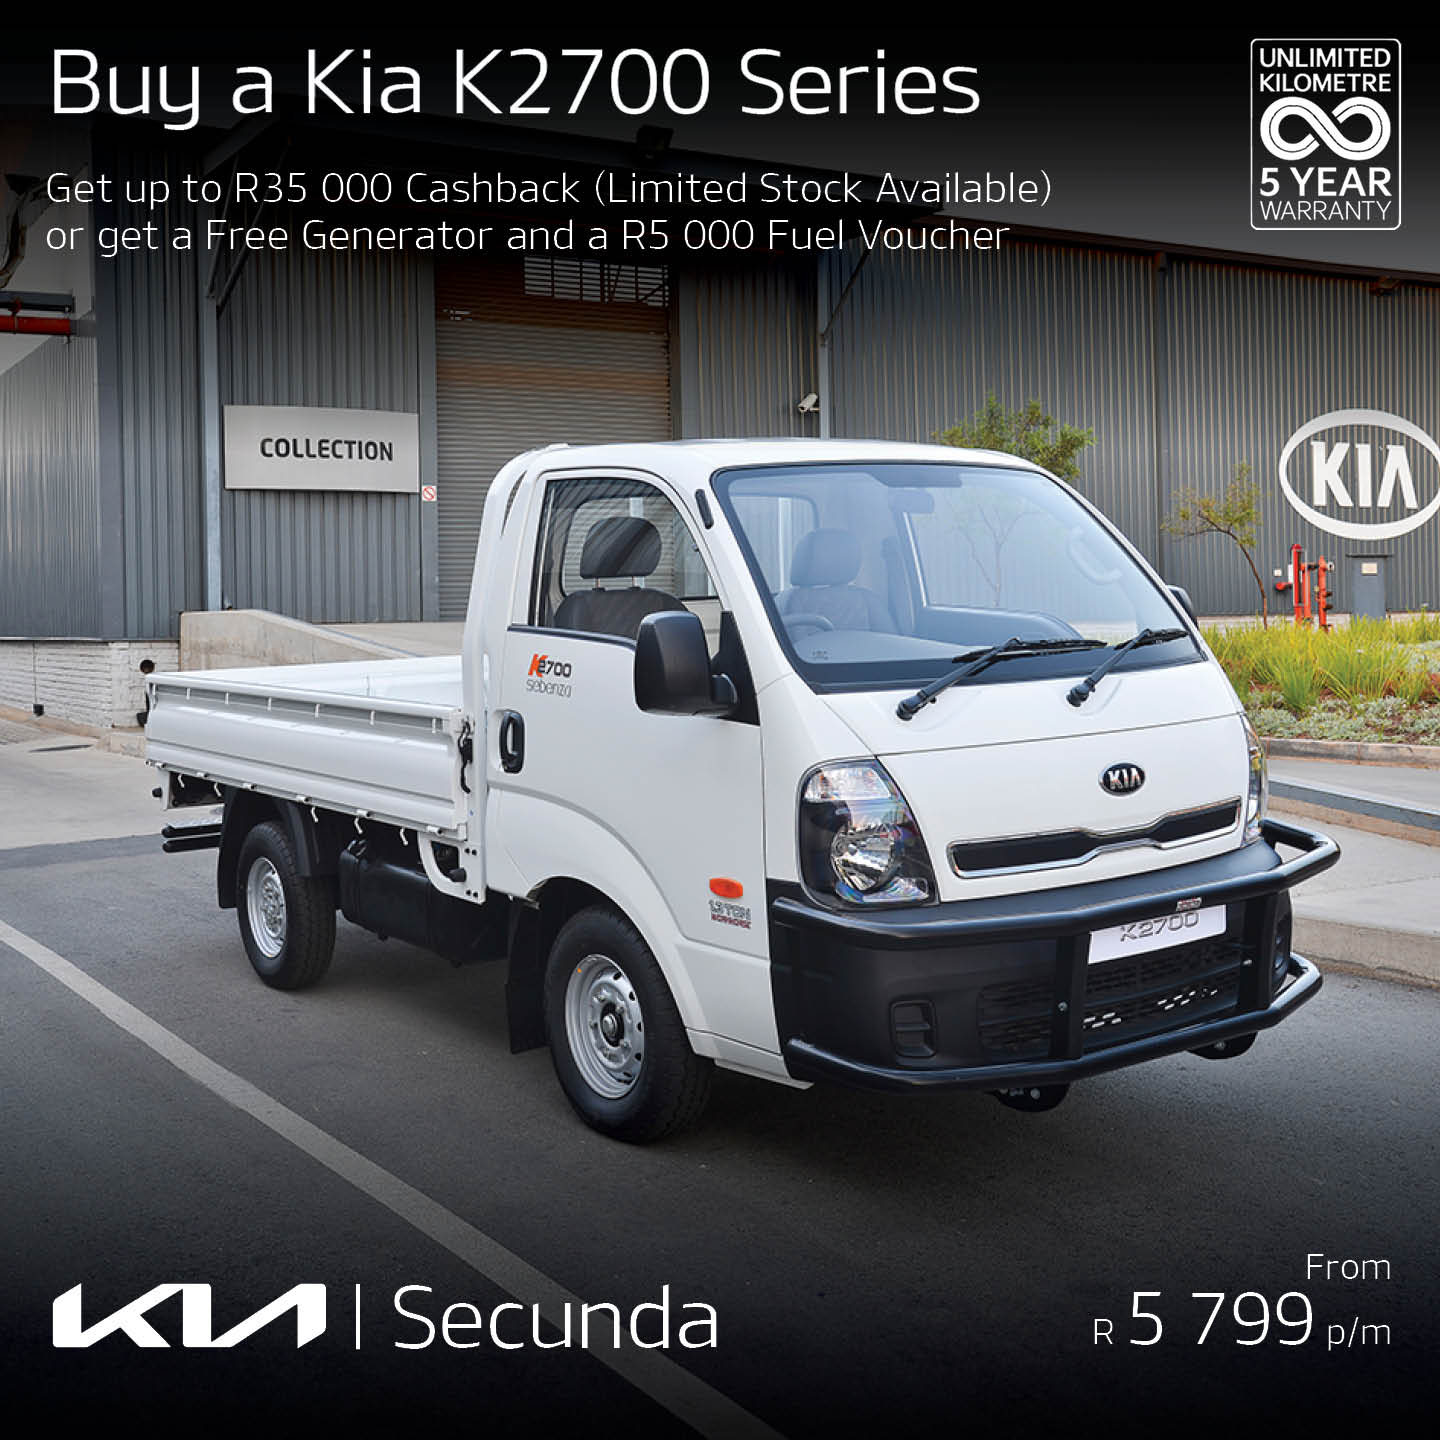 Buy a K2700 Series image from 